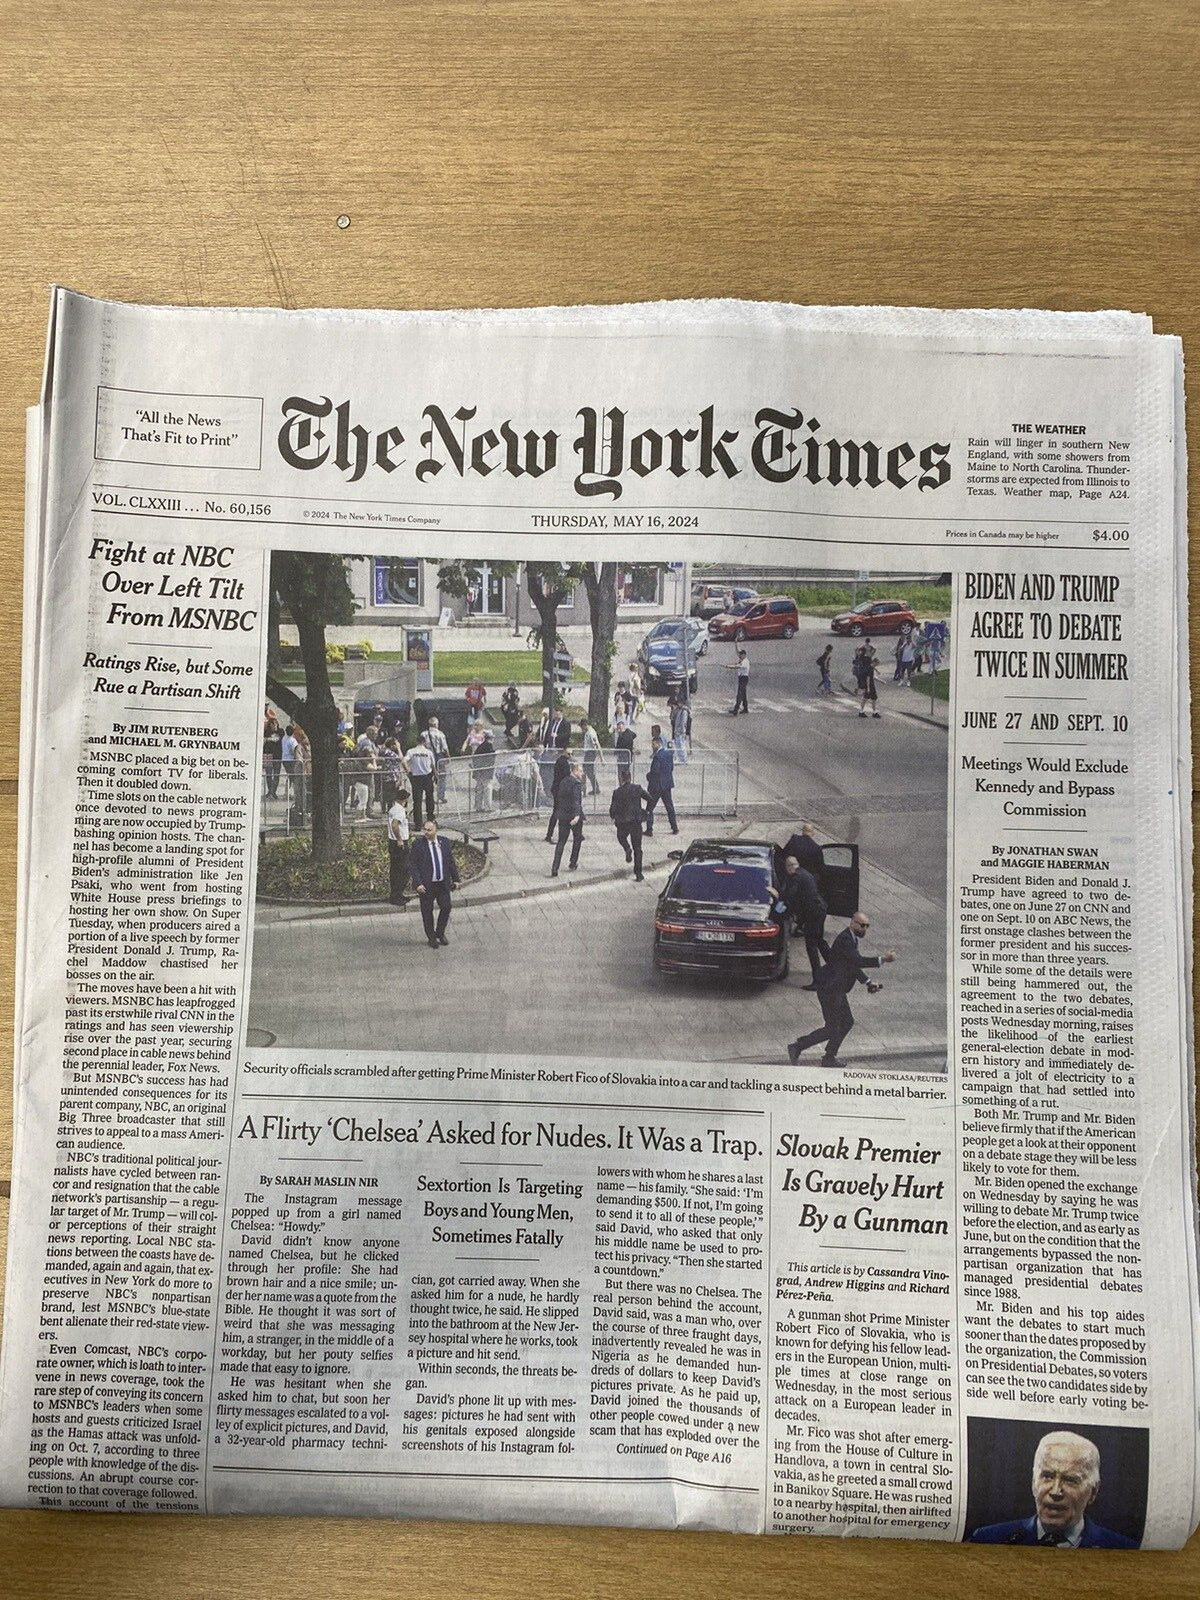 The New York Times Thursday, May 16, 2024 Complete Print Newspaper (NEW)